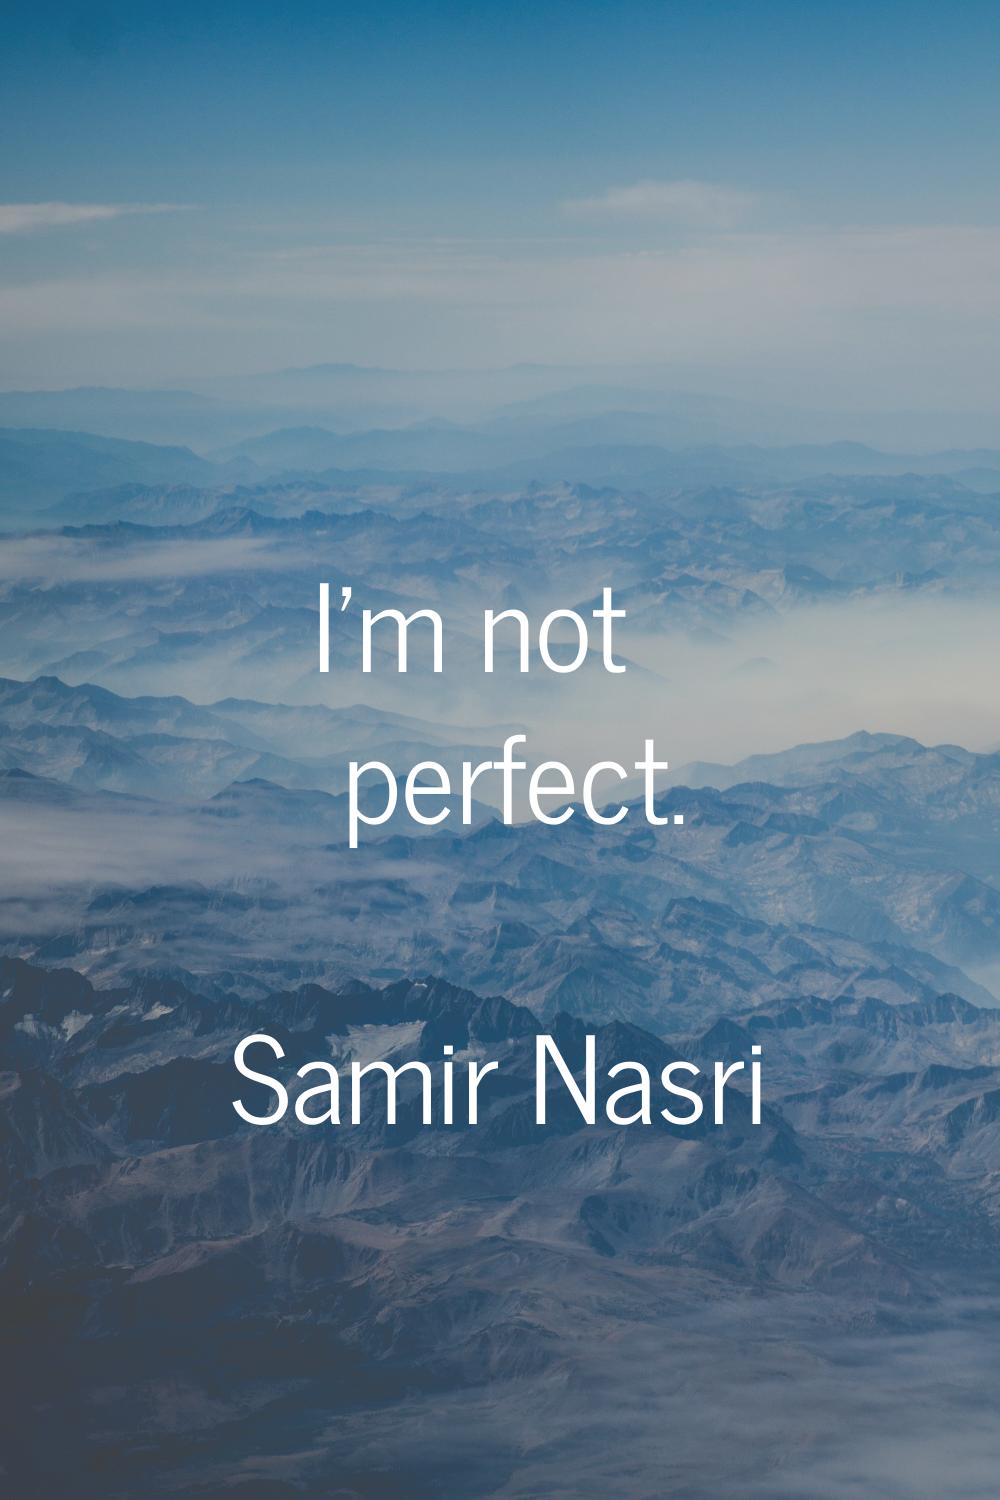 I'm not perfect.